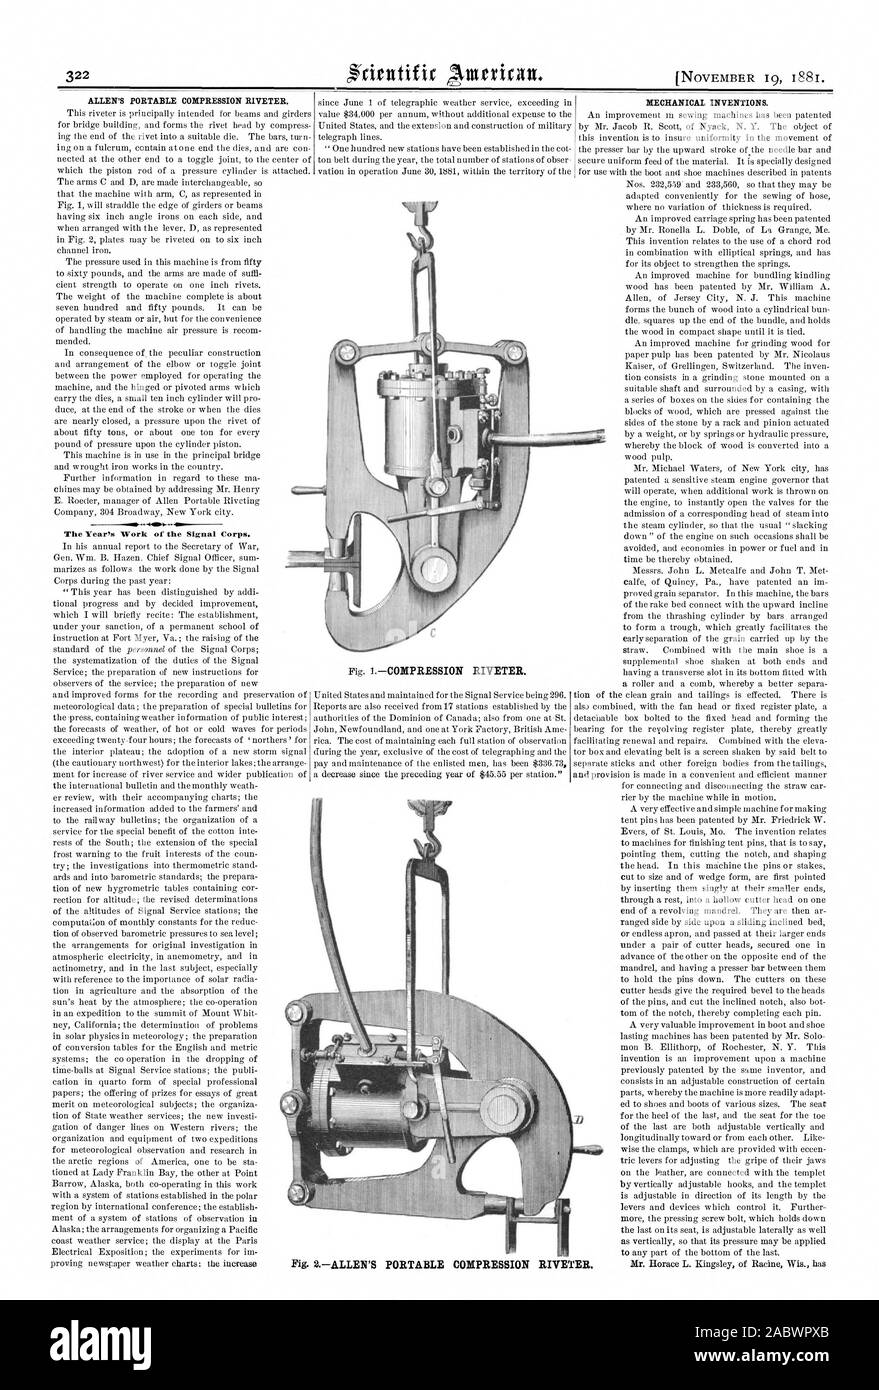 https://c8.alamy.com/comp/2ABWPXB/allens-portable-compression-riveter-the-years-work-of-the-signal-corps-mechanical-inventions-scientific-american-1881-11-19-2ABWPXB.jpg